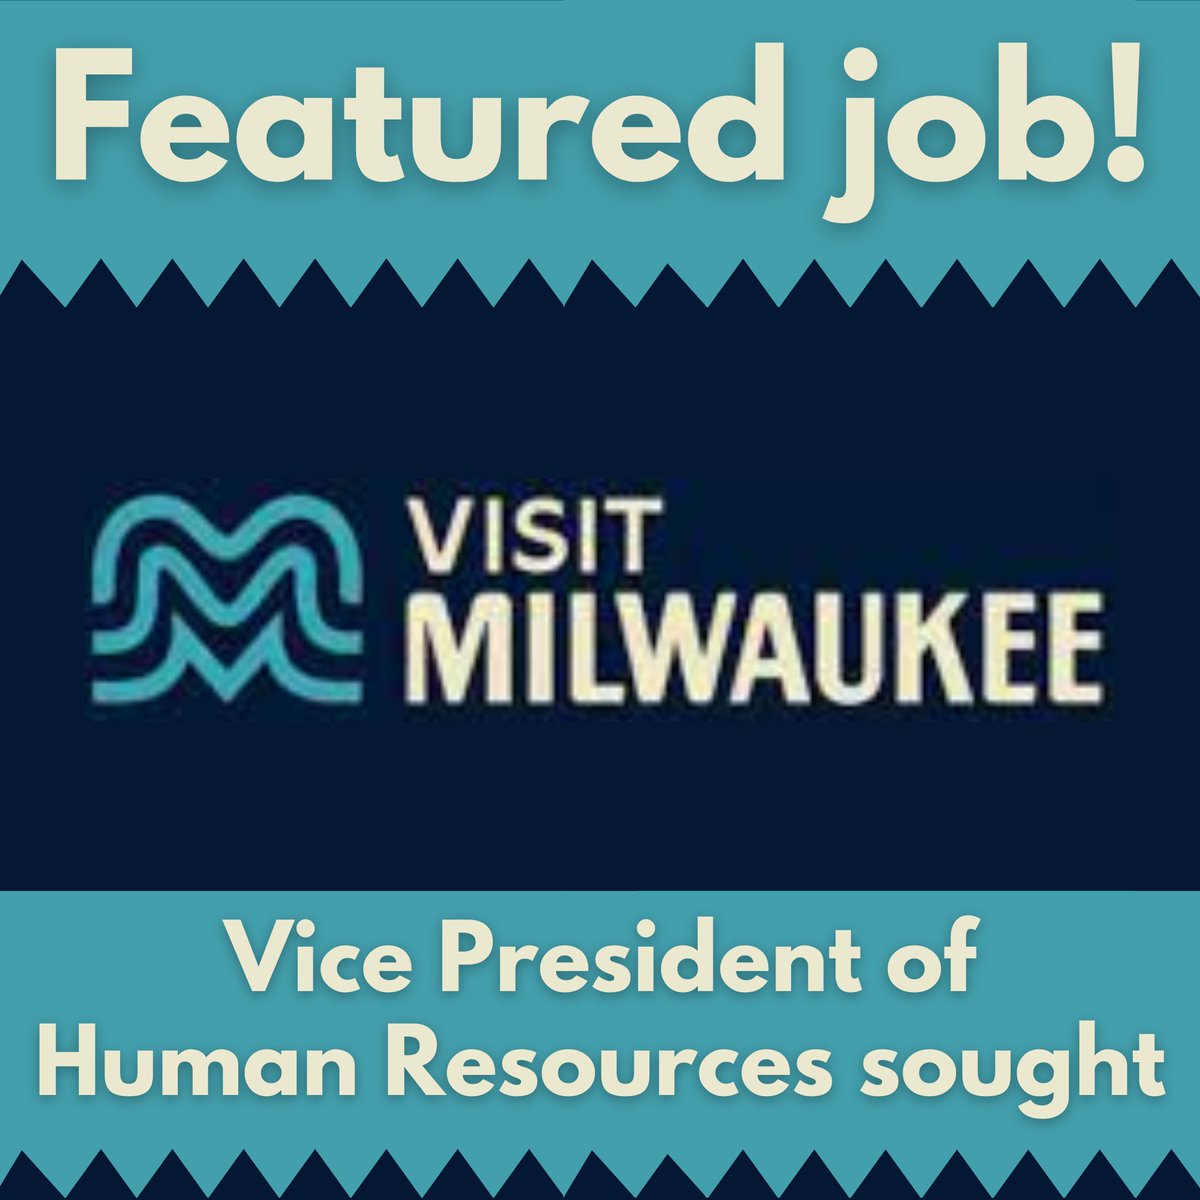 Join @visitmilwaukee's team as their Vice President of Human Resources (learn more or apply ➡️ tinyurl.com/vmvphr) in #Milwaukee. Apply now for this important #job opening!

#NonprofitJobs #MKE #MKEjobs #MilwaukeeWI #HRjobs #HRcareers #NonprofitCareers #Wisconsin #WI #WIjobs